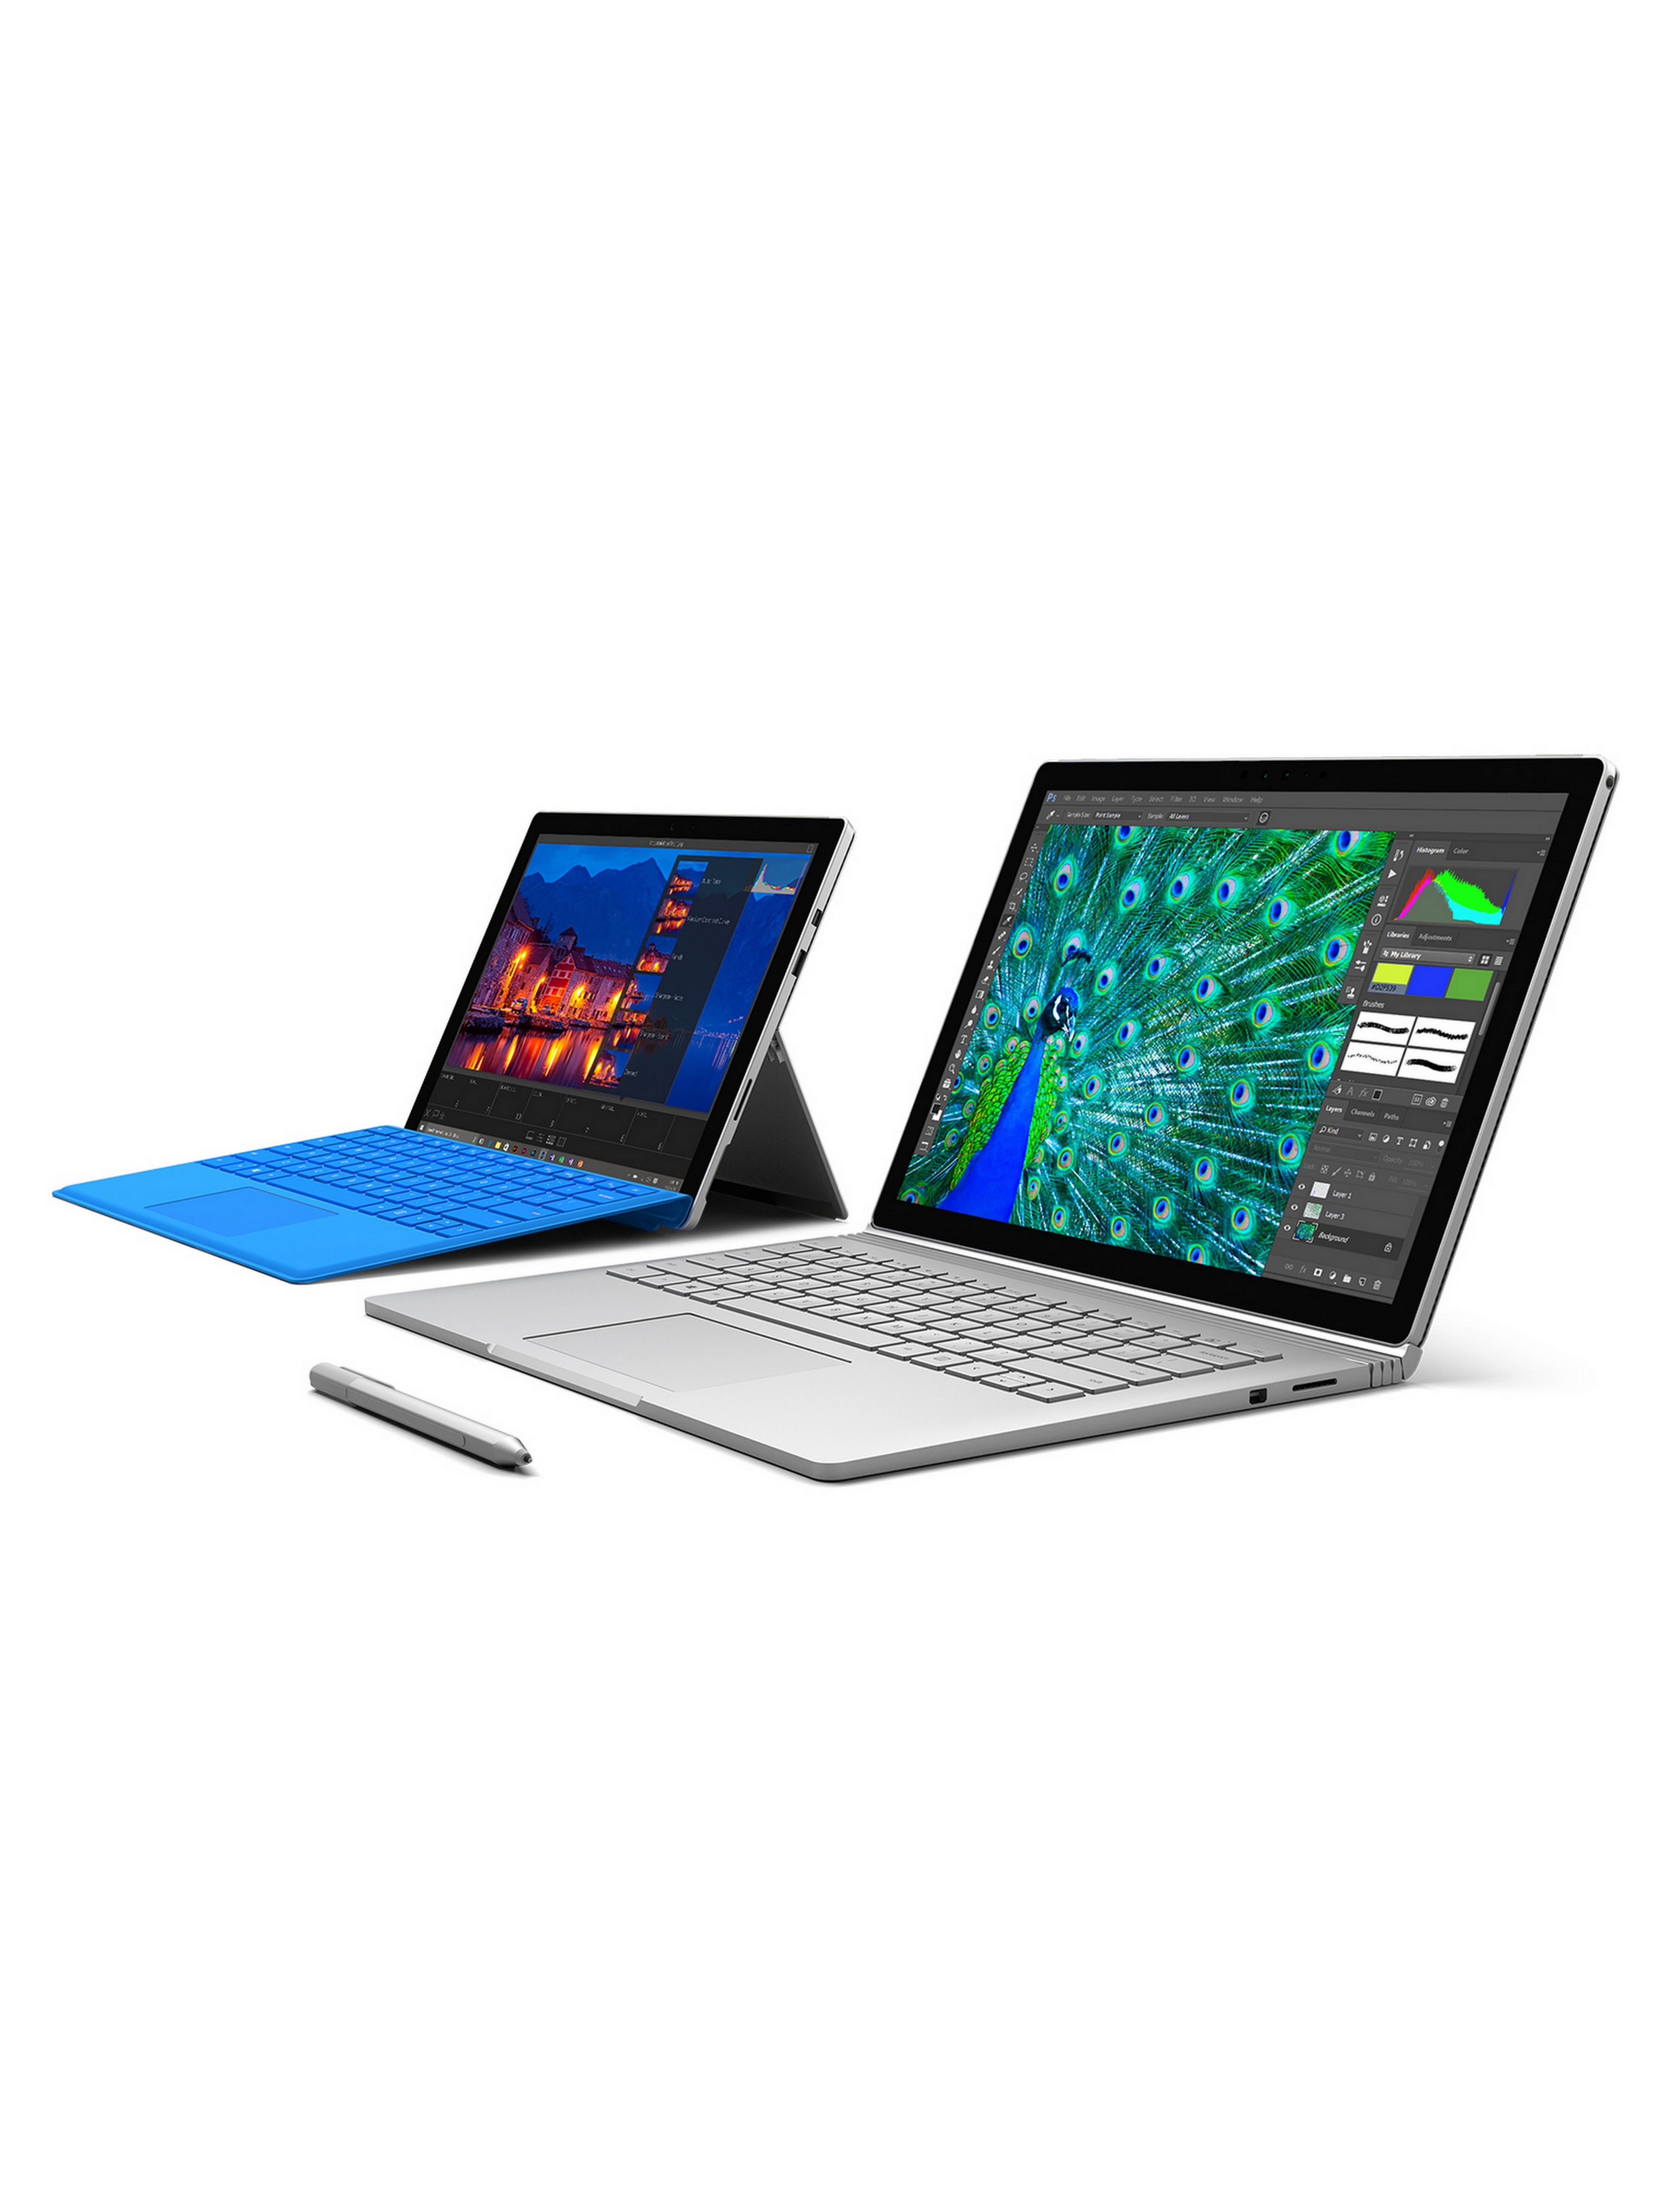 On sale today: 1TB Core i7 Surface Book and Surface Pro 4, and new